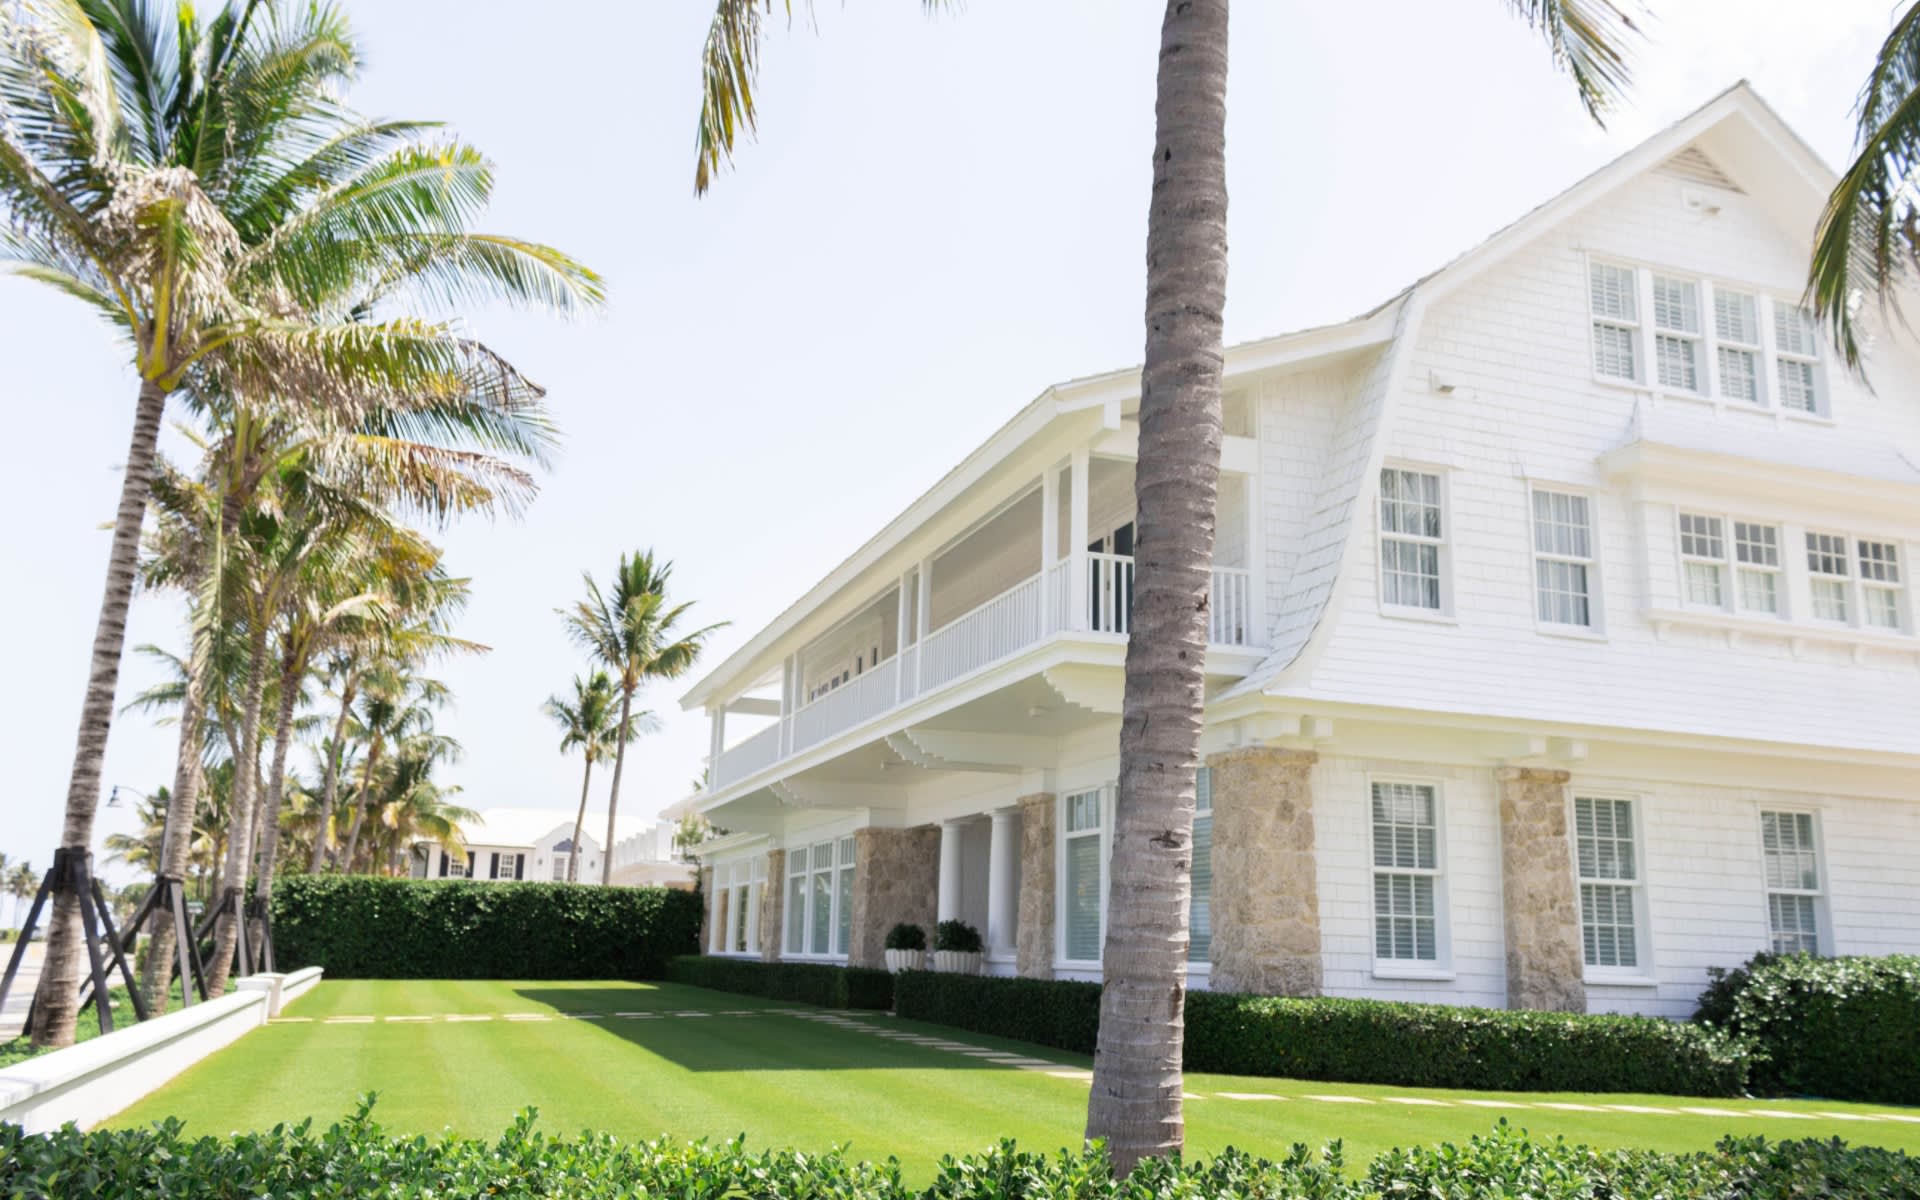 Is It Possible to Make Money on a Vacation Rental Home?